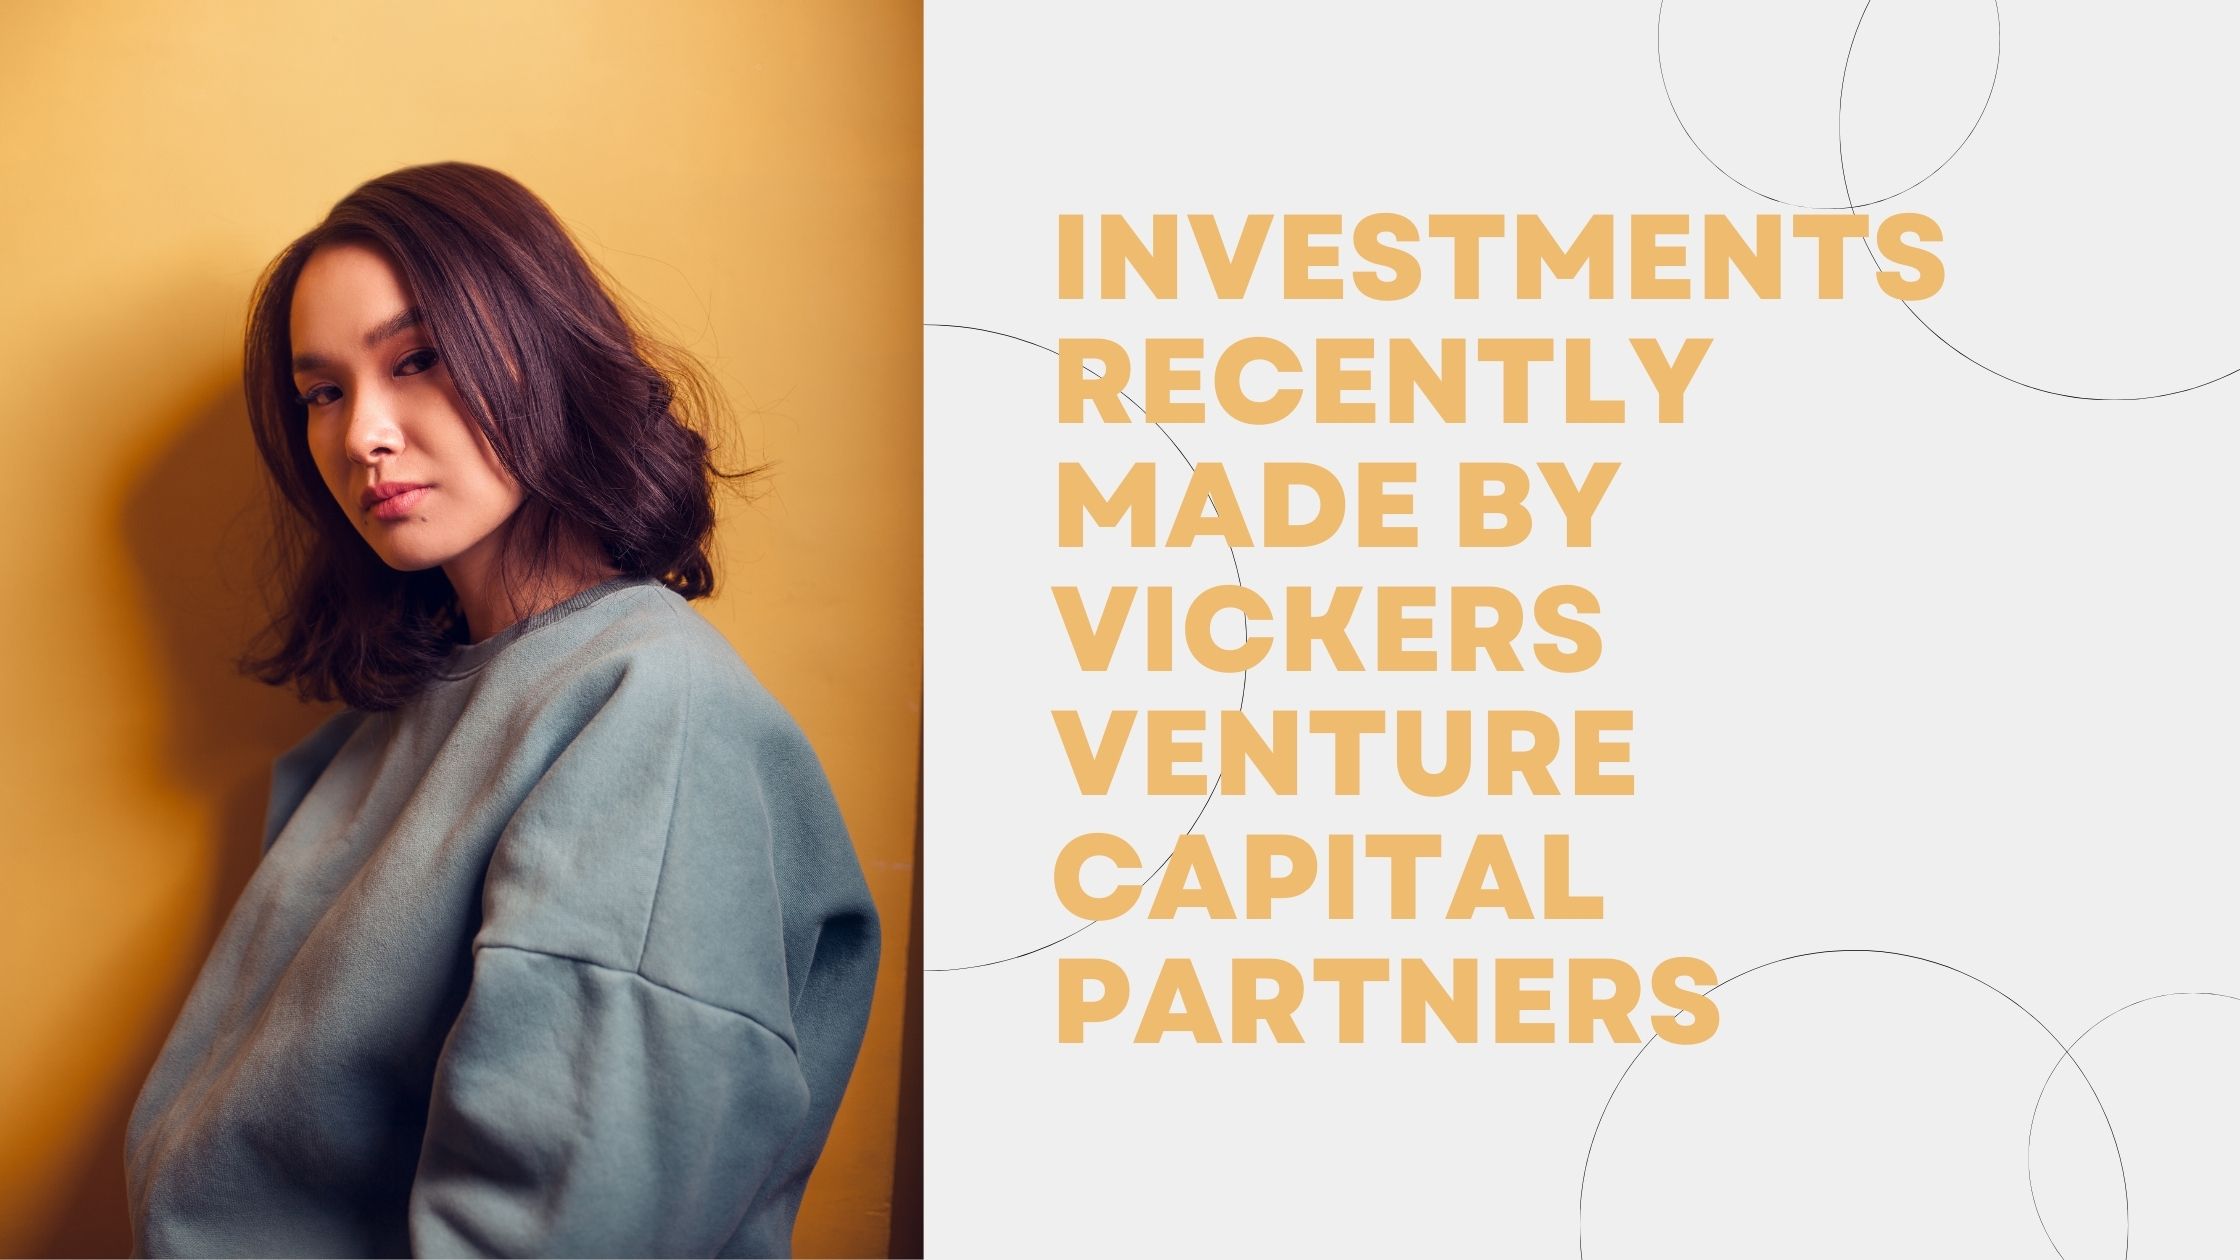 Investments Recently Made by Vickers Venture Capital Partners